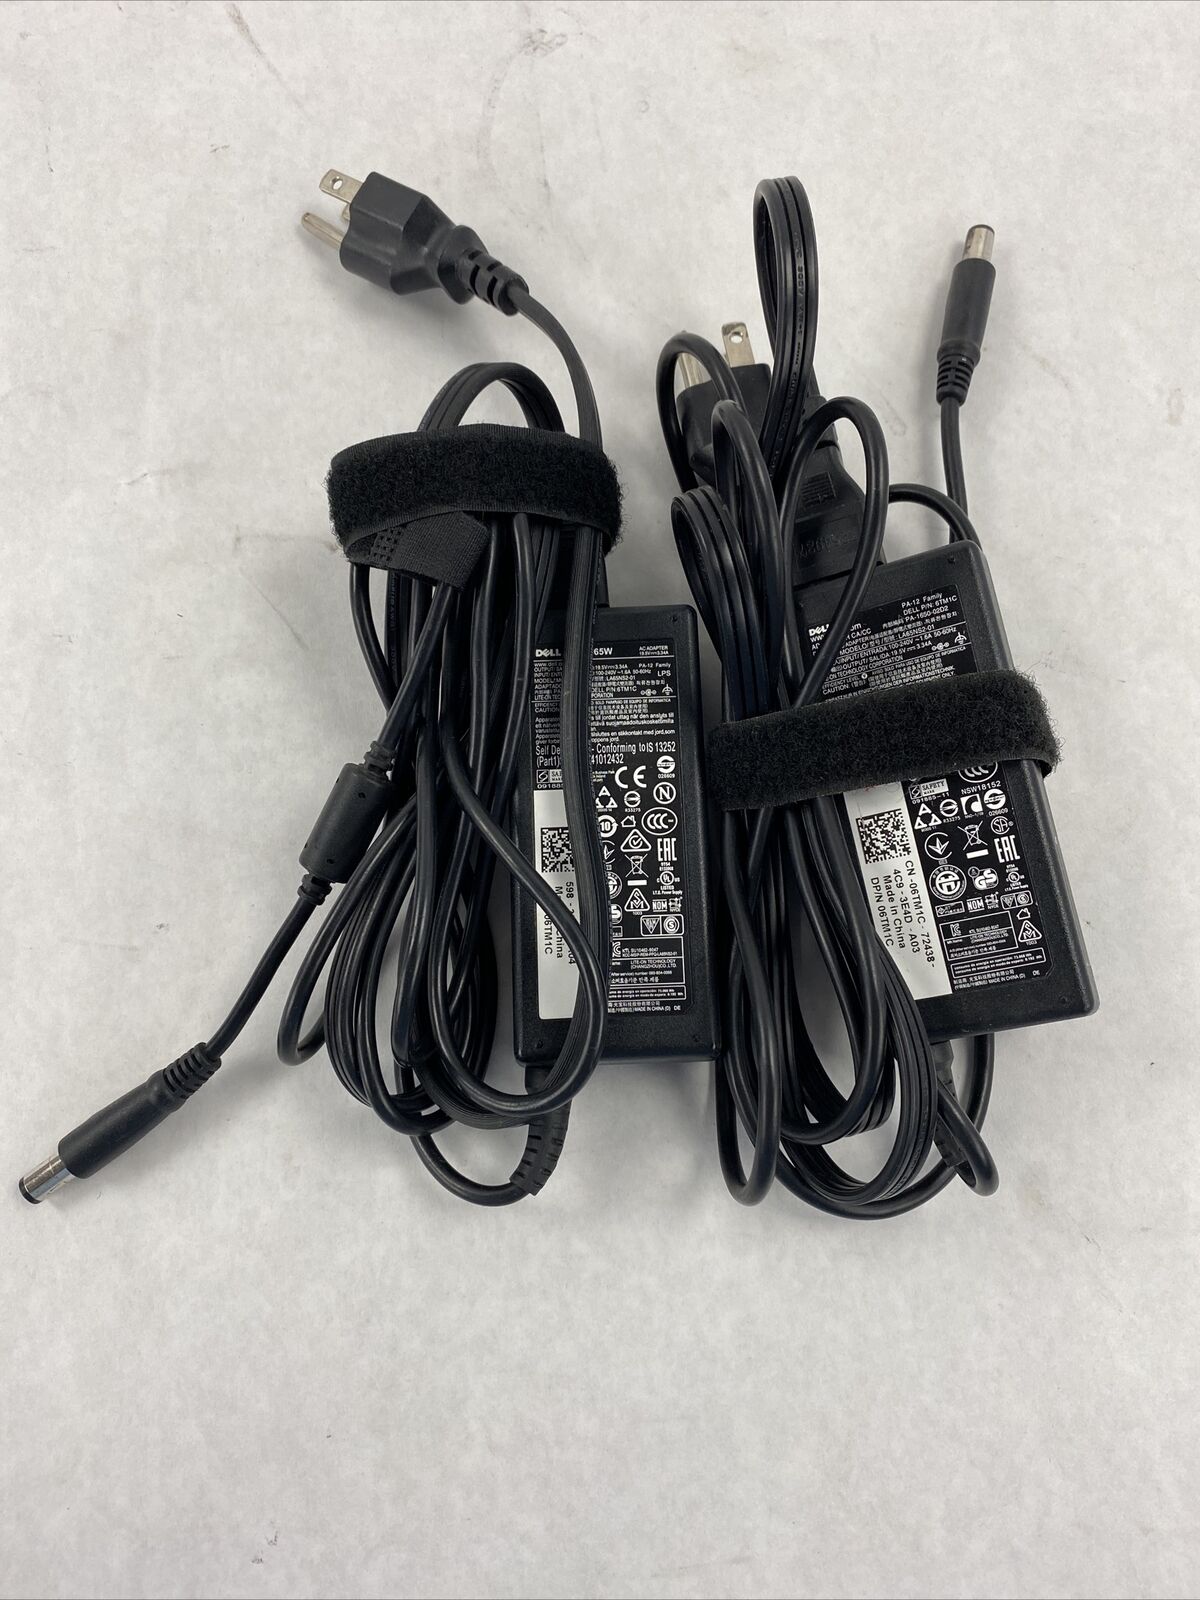 Lot of 2 Dell 06TM1C Laptop Charger Adapter 65W PA-12 Family 19.5V